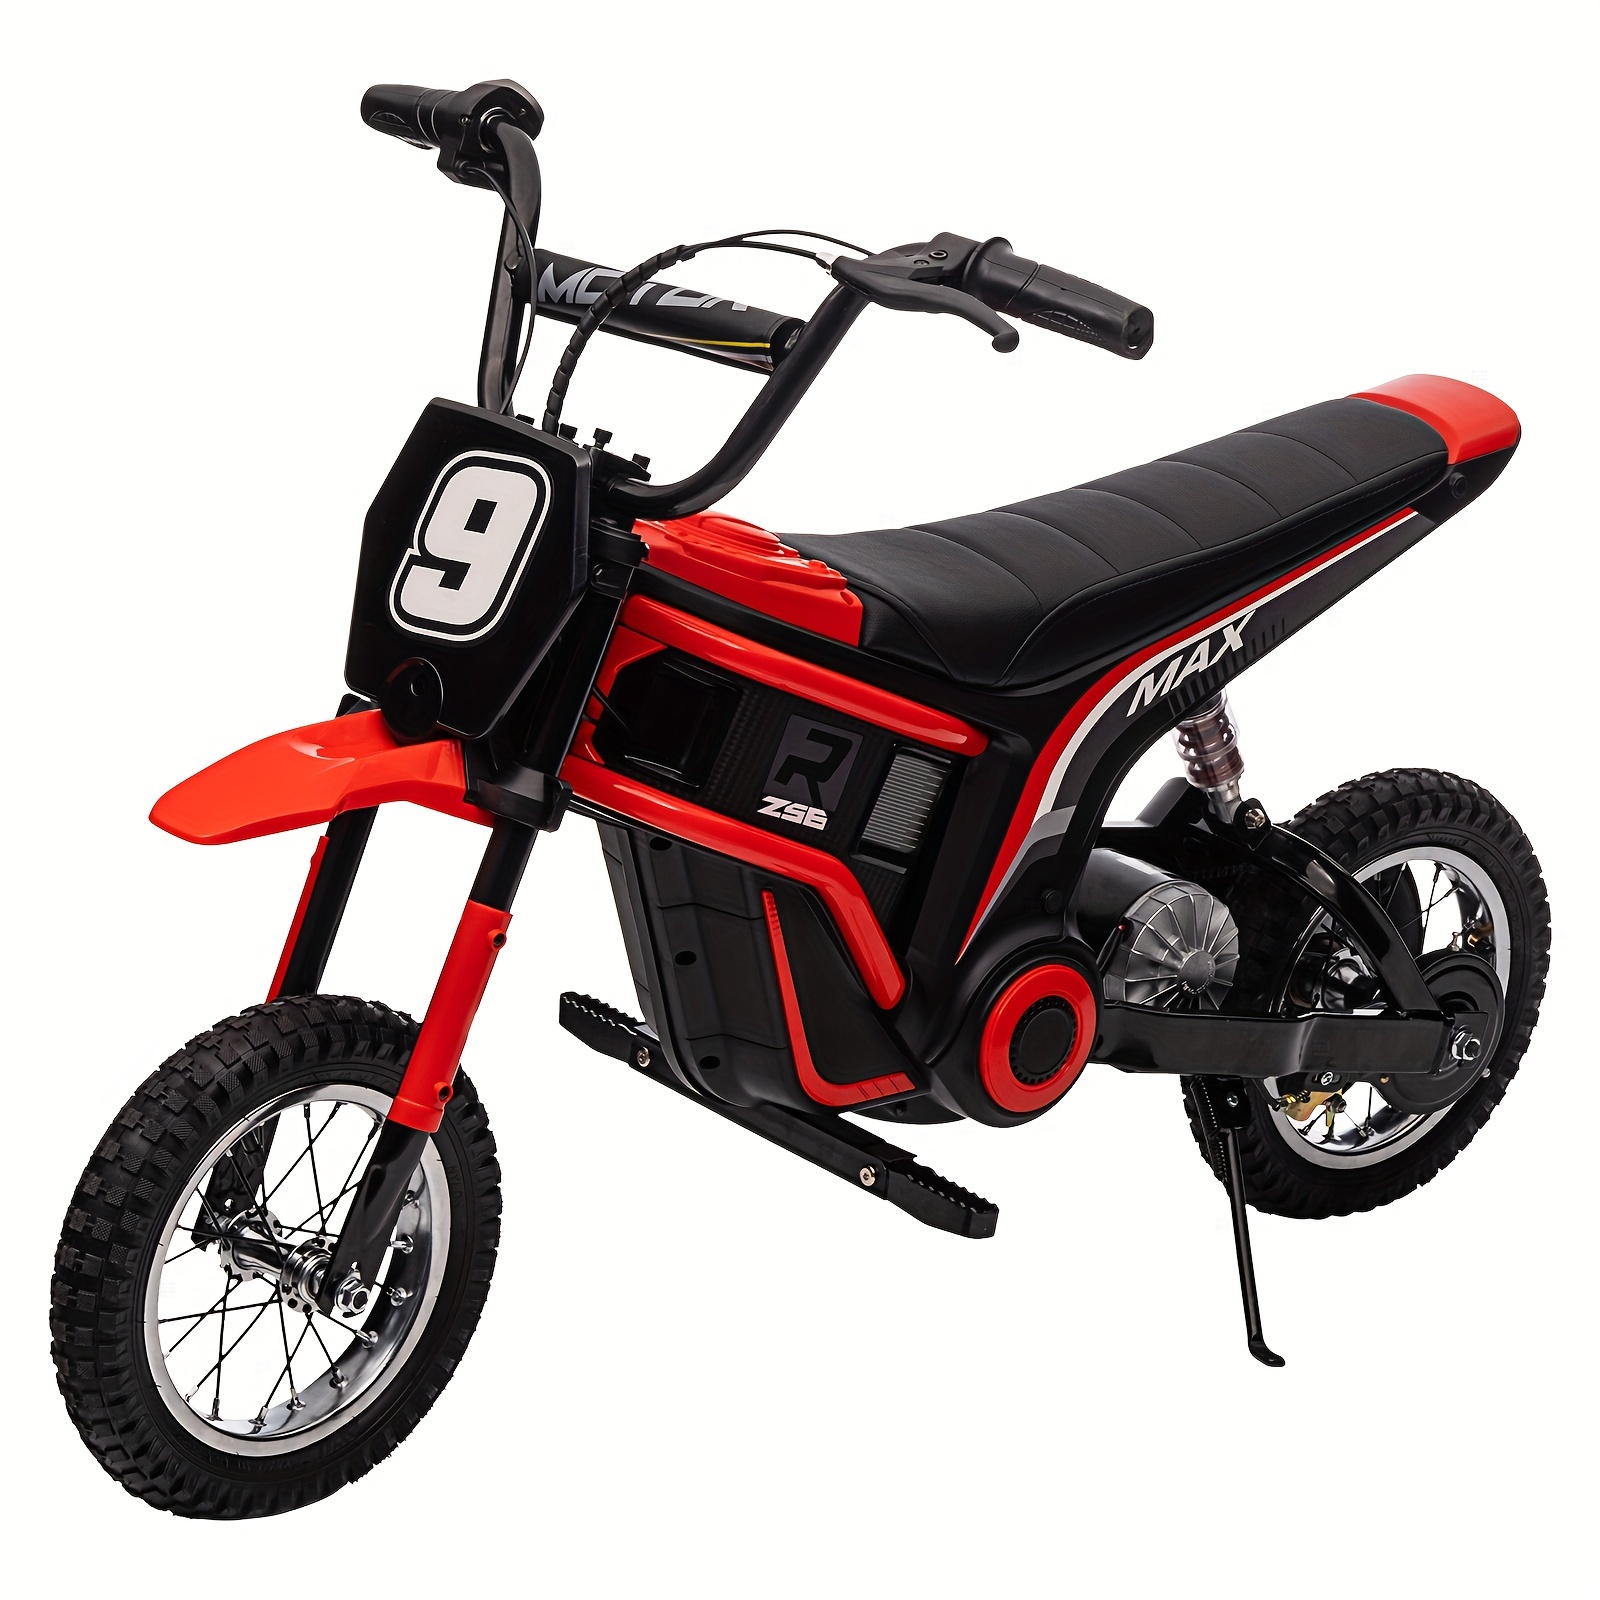 

Dirt Bike, Motorcycle Car, 2-speed Modes, Max Weight 135 Lbs